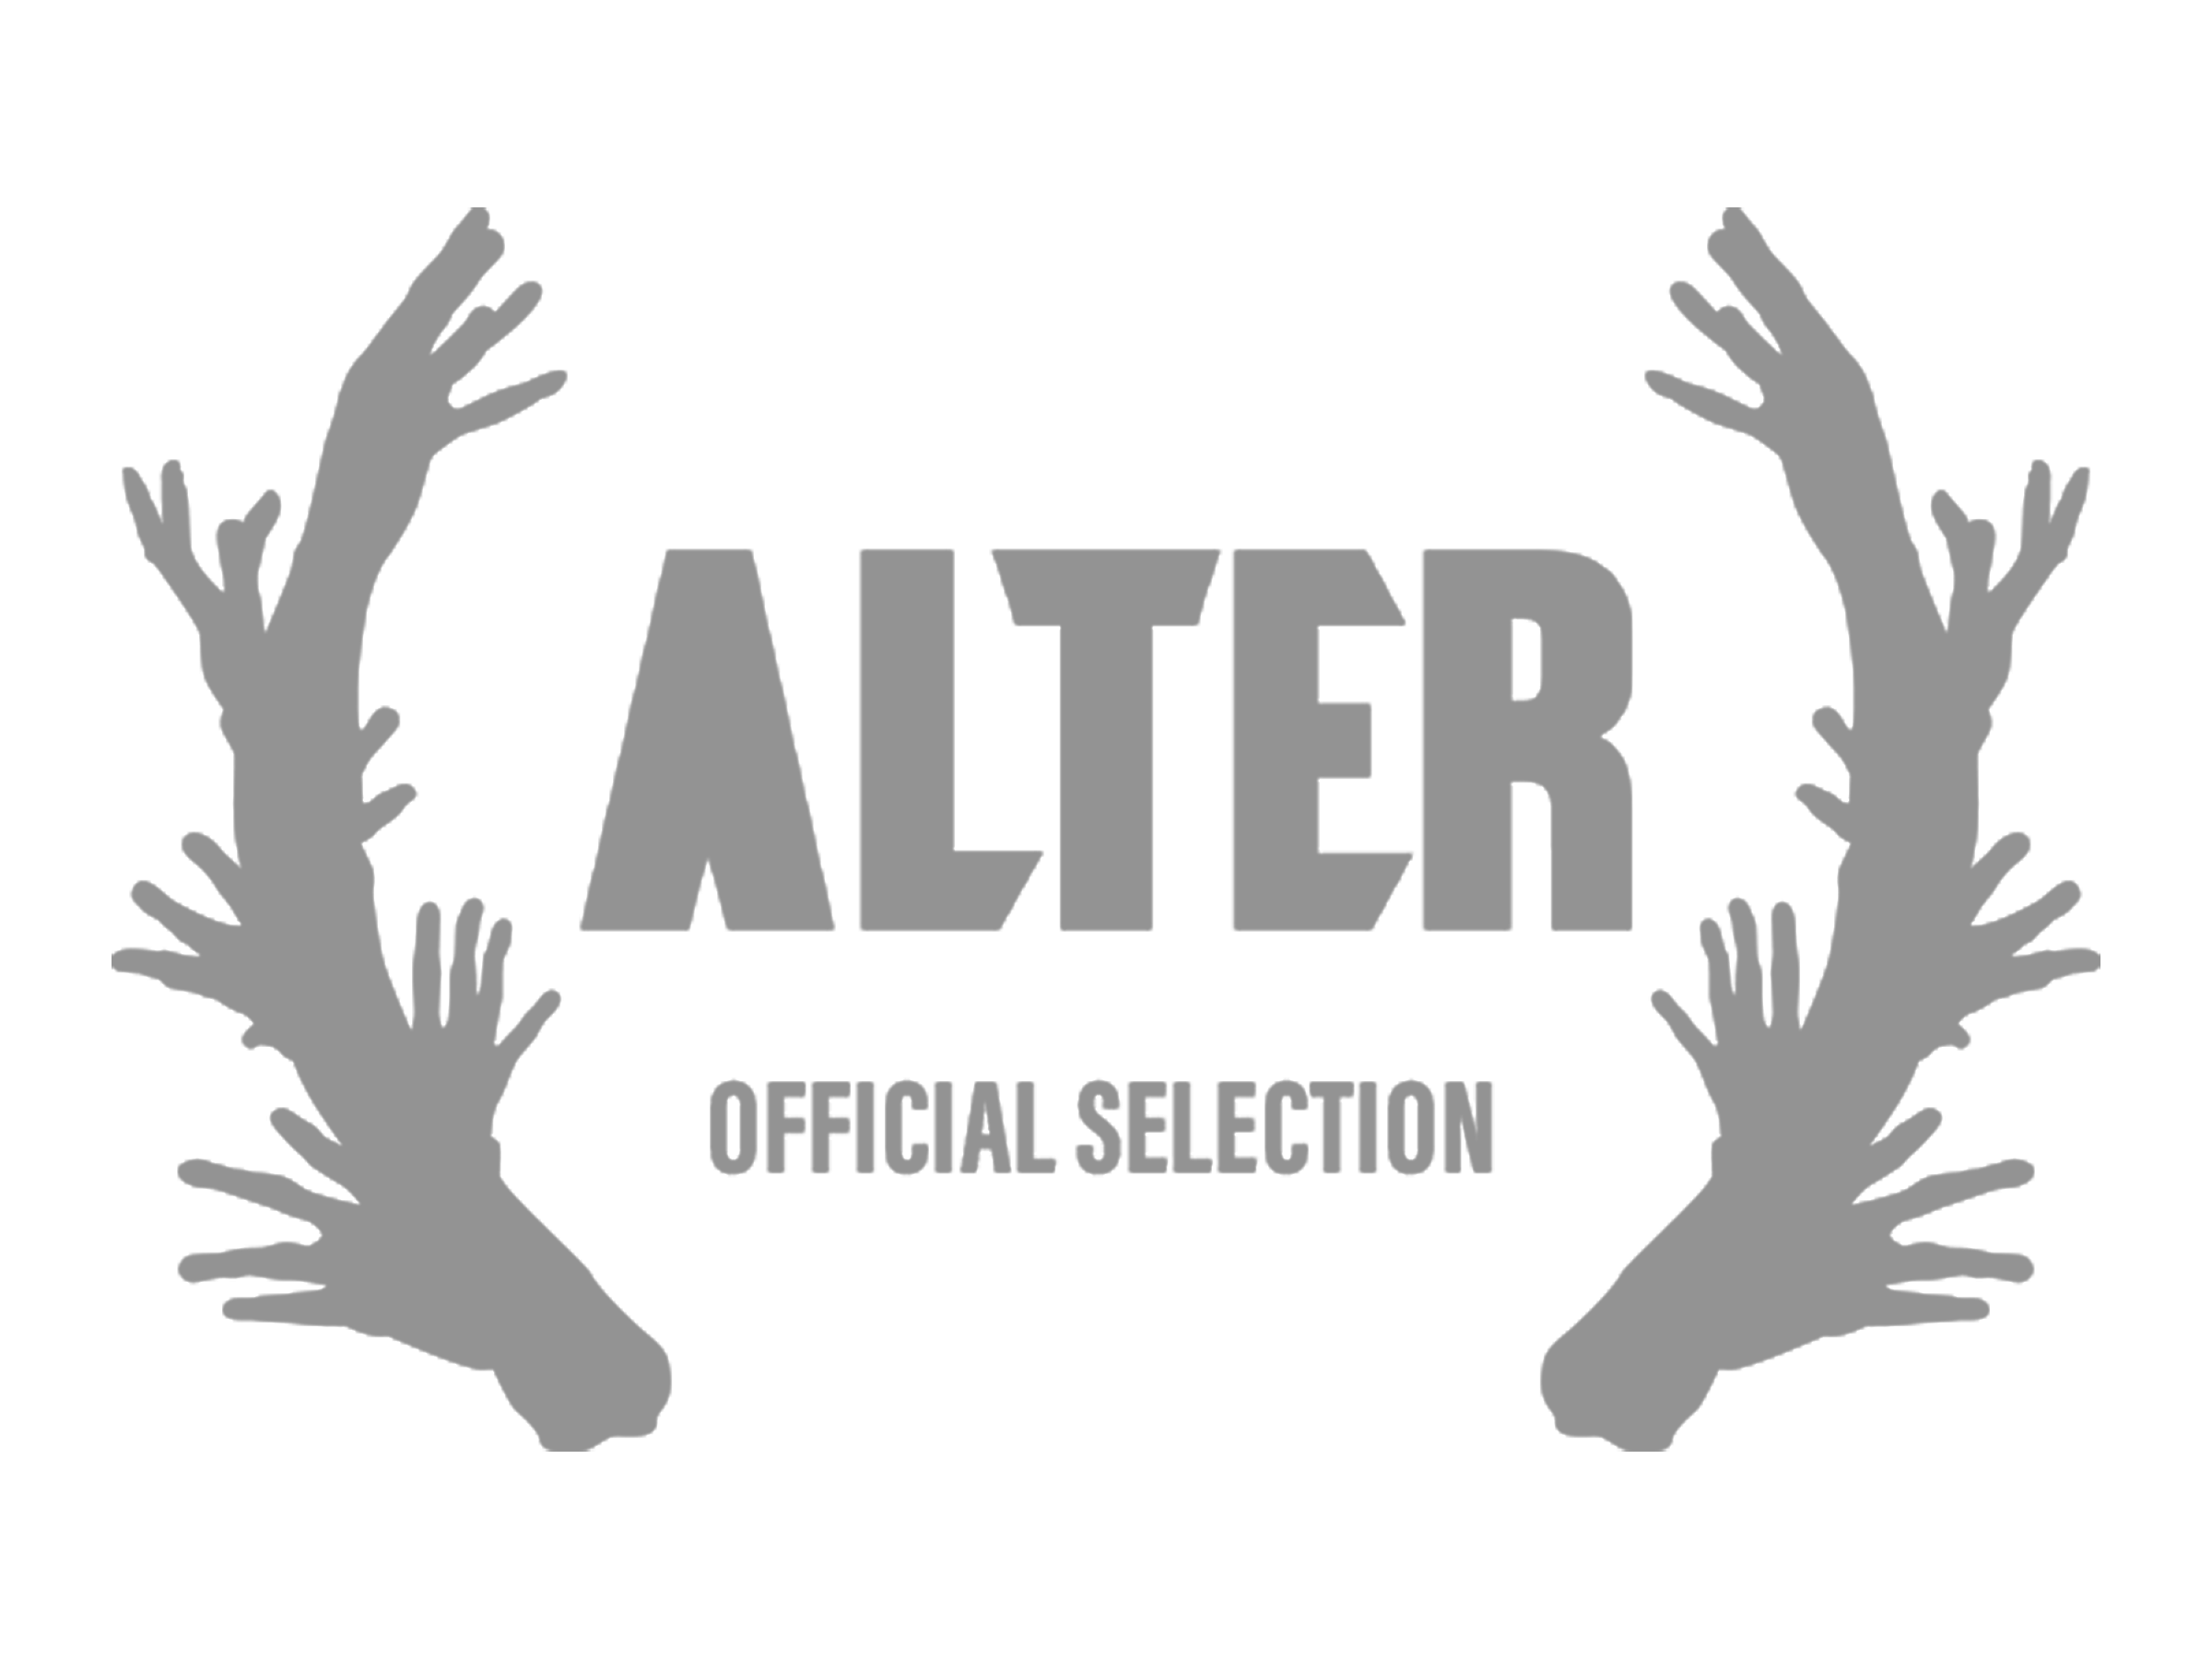 ALTER_OfficialSelection.png